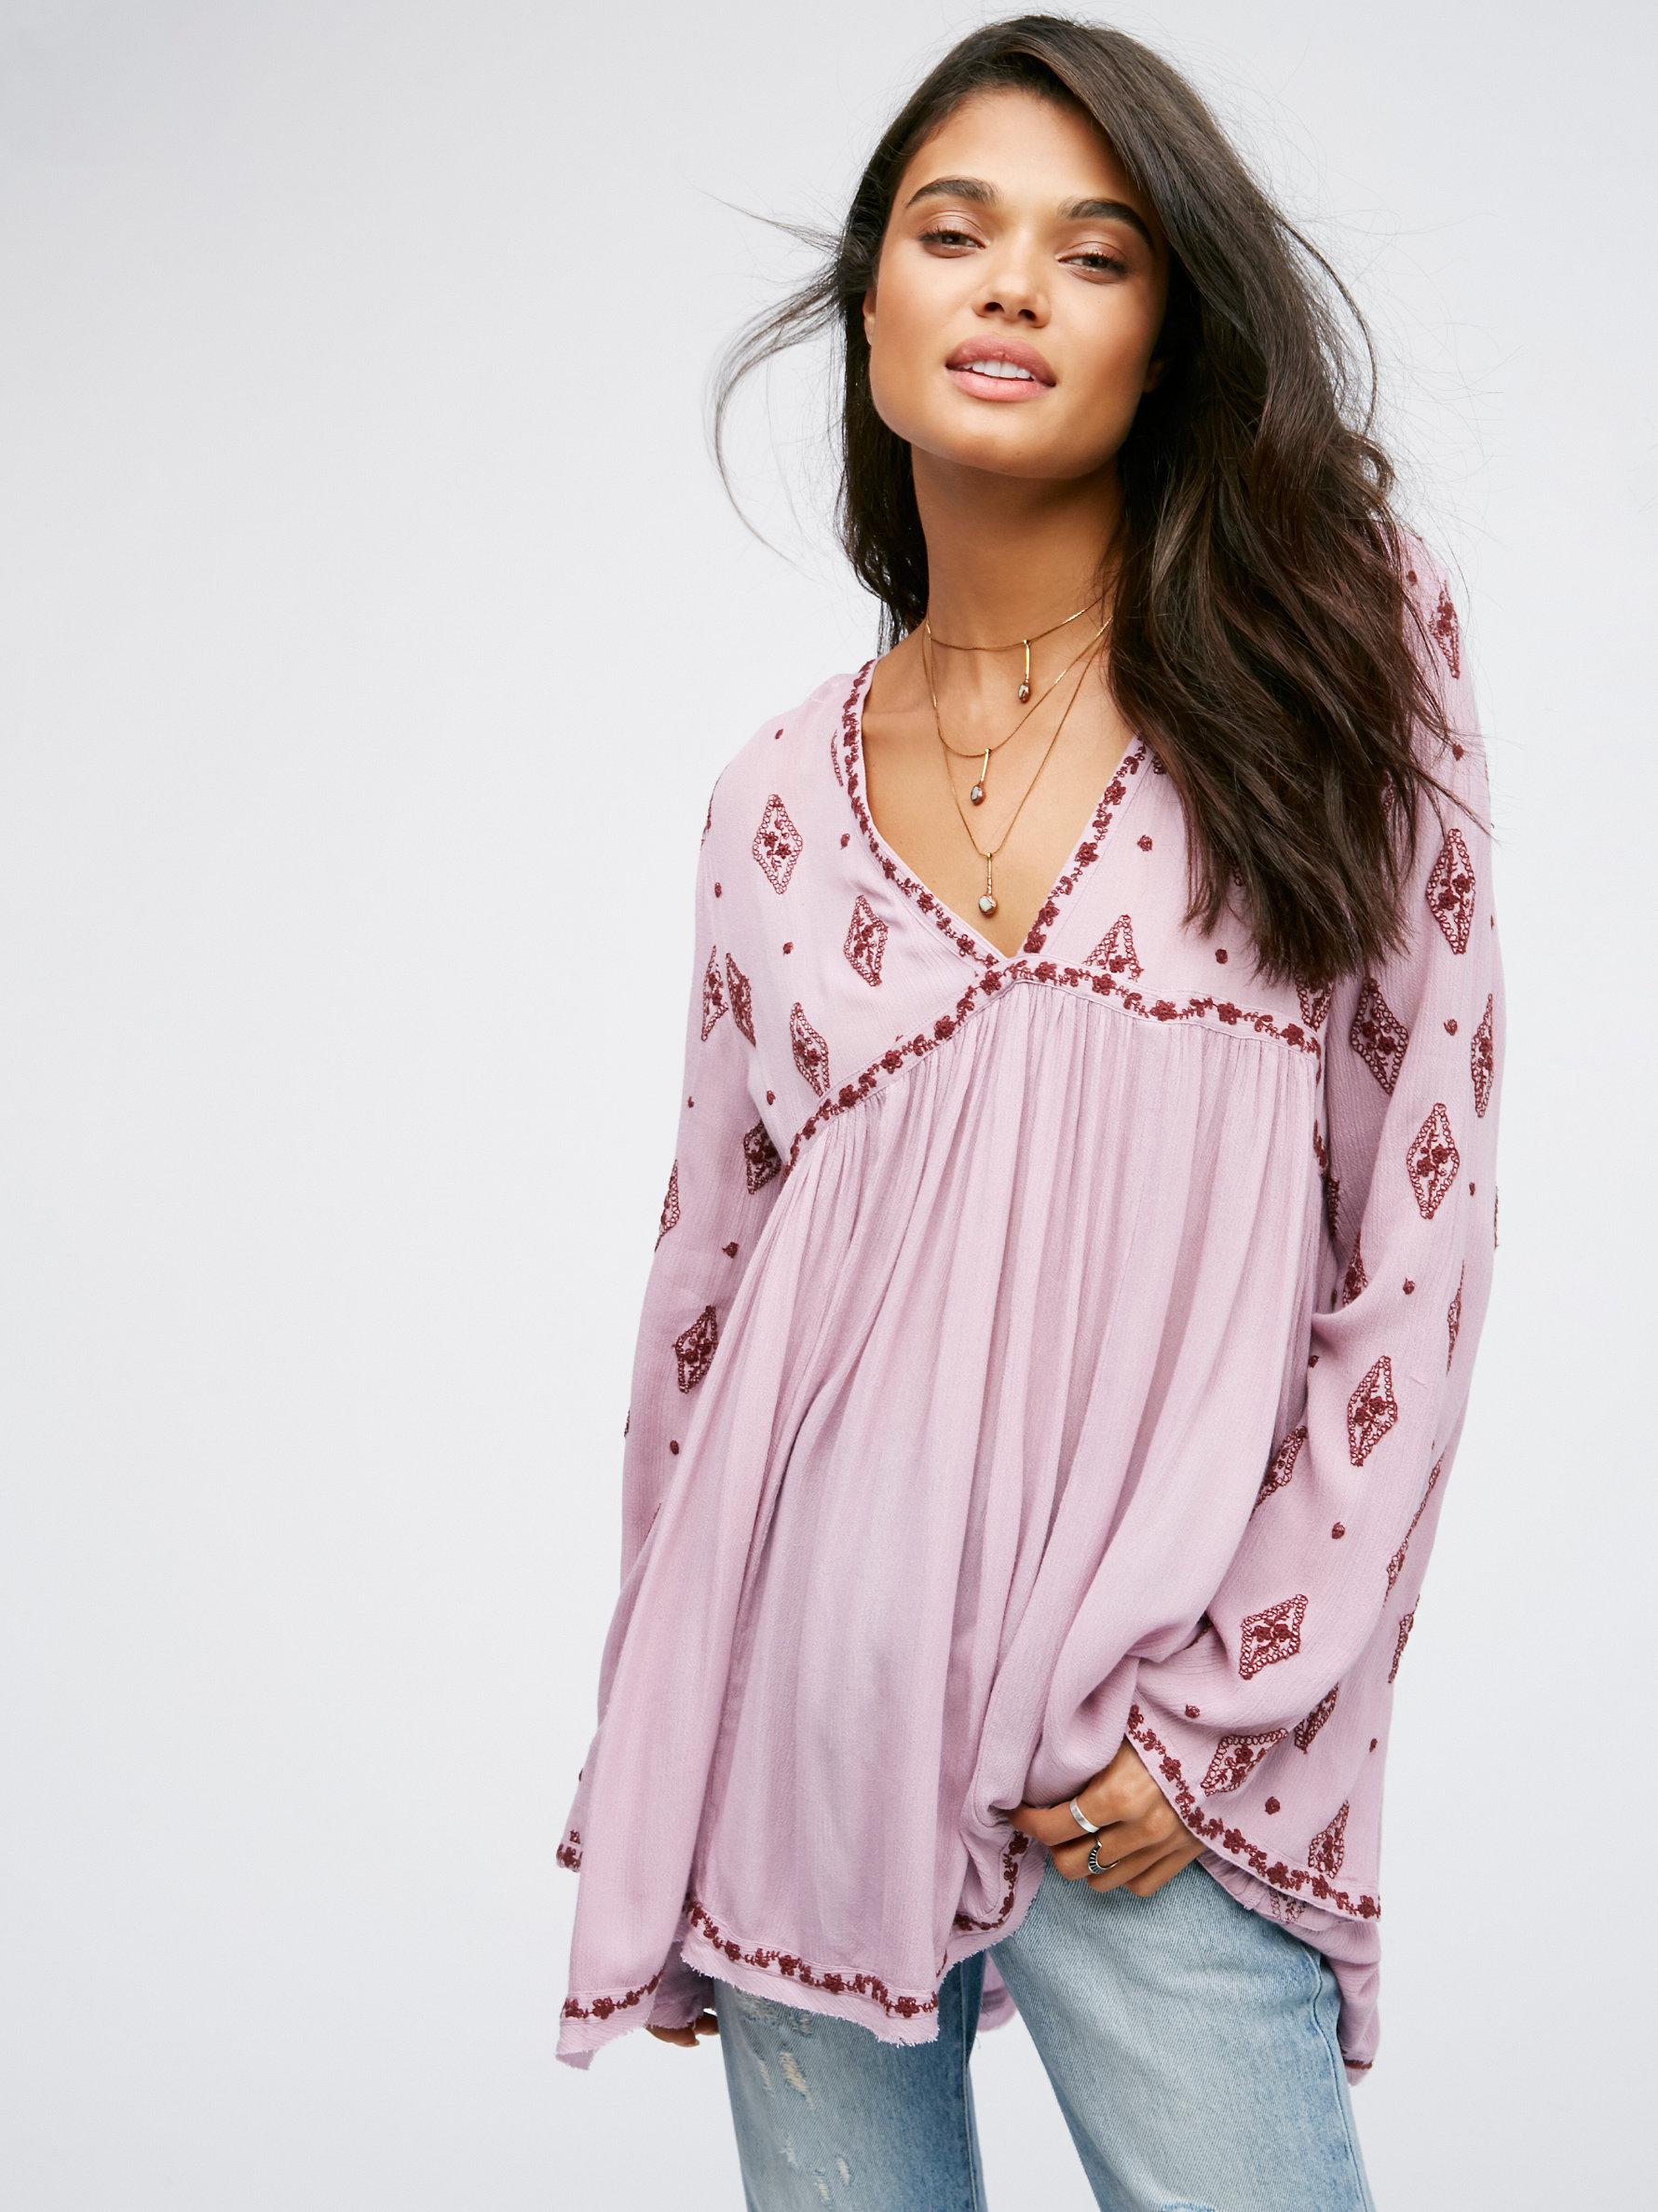 Free People Diamond Embroidered Top in Pink - Lyst